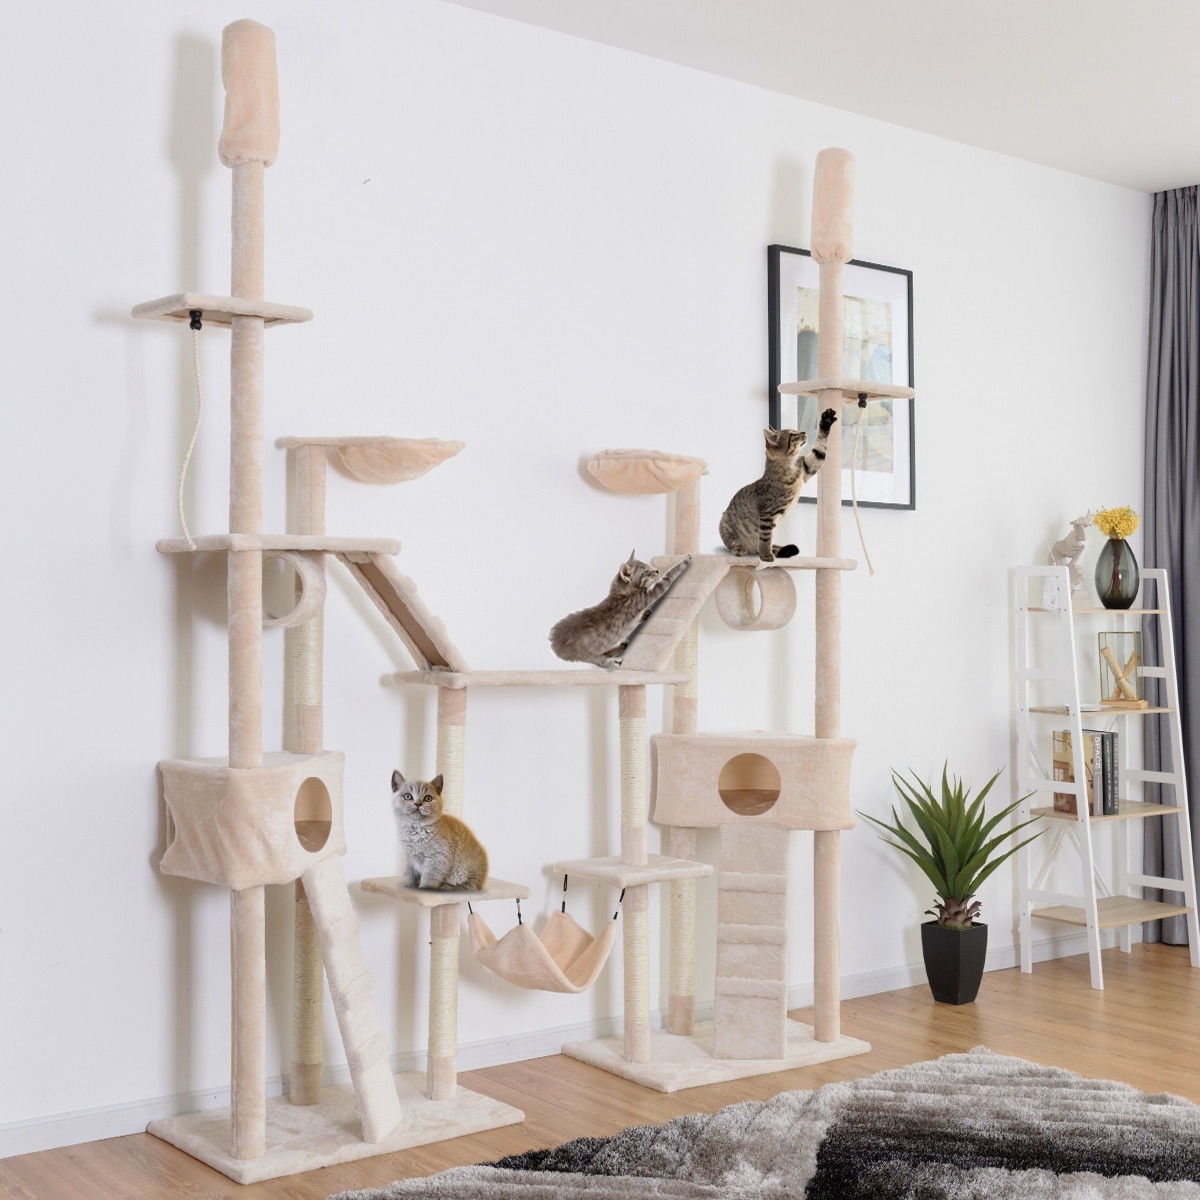 kitty condo for large cats